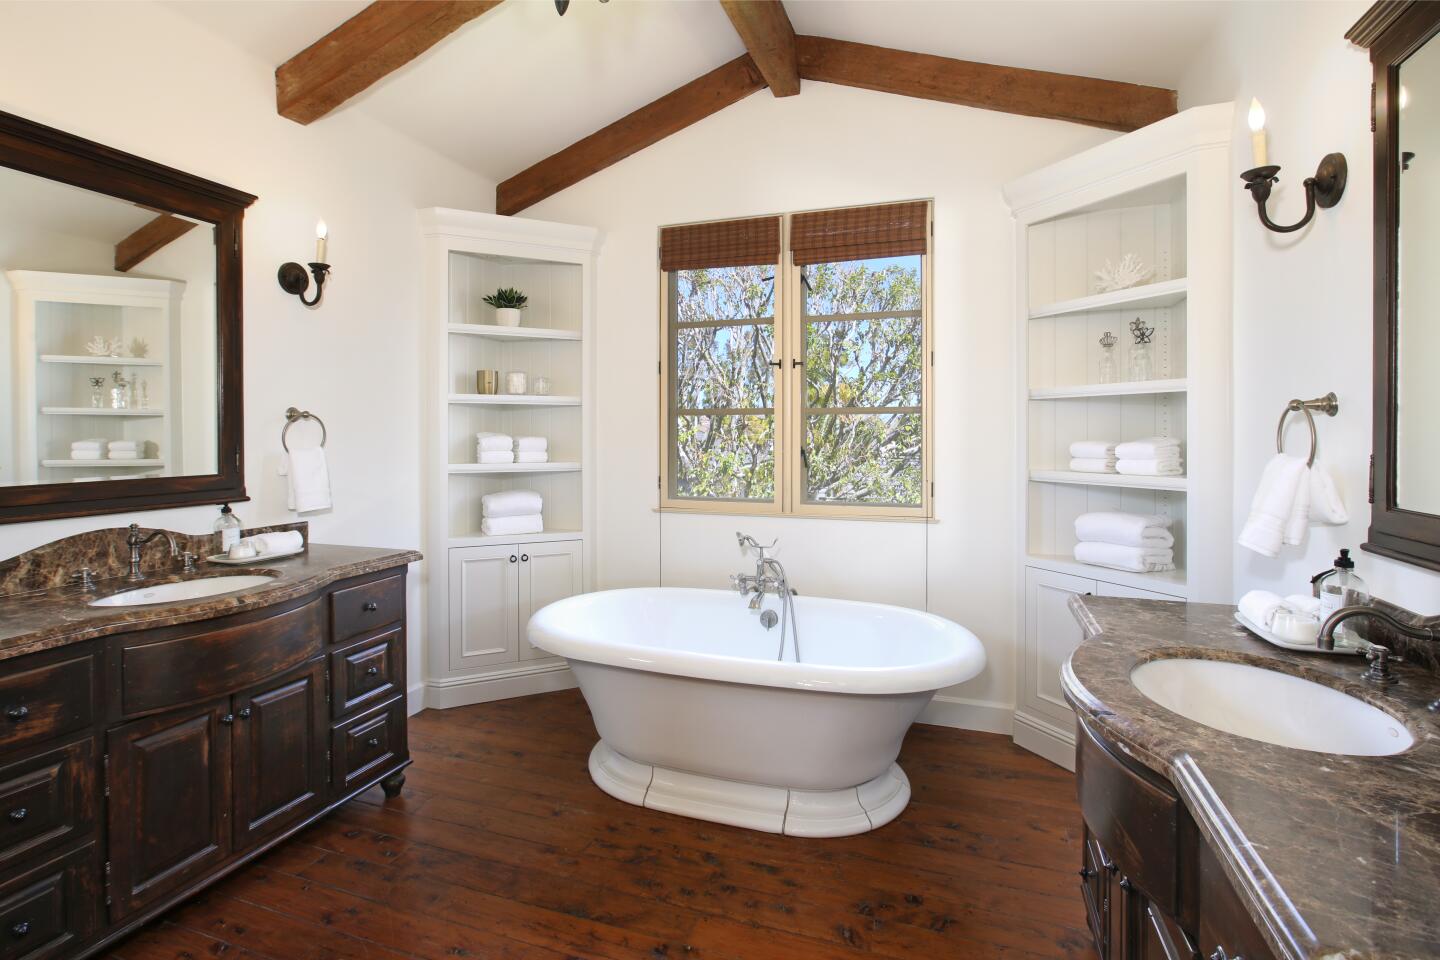 A standing tub, wood beam ceilings and corner built-ins.